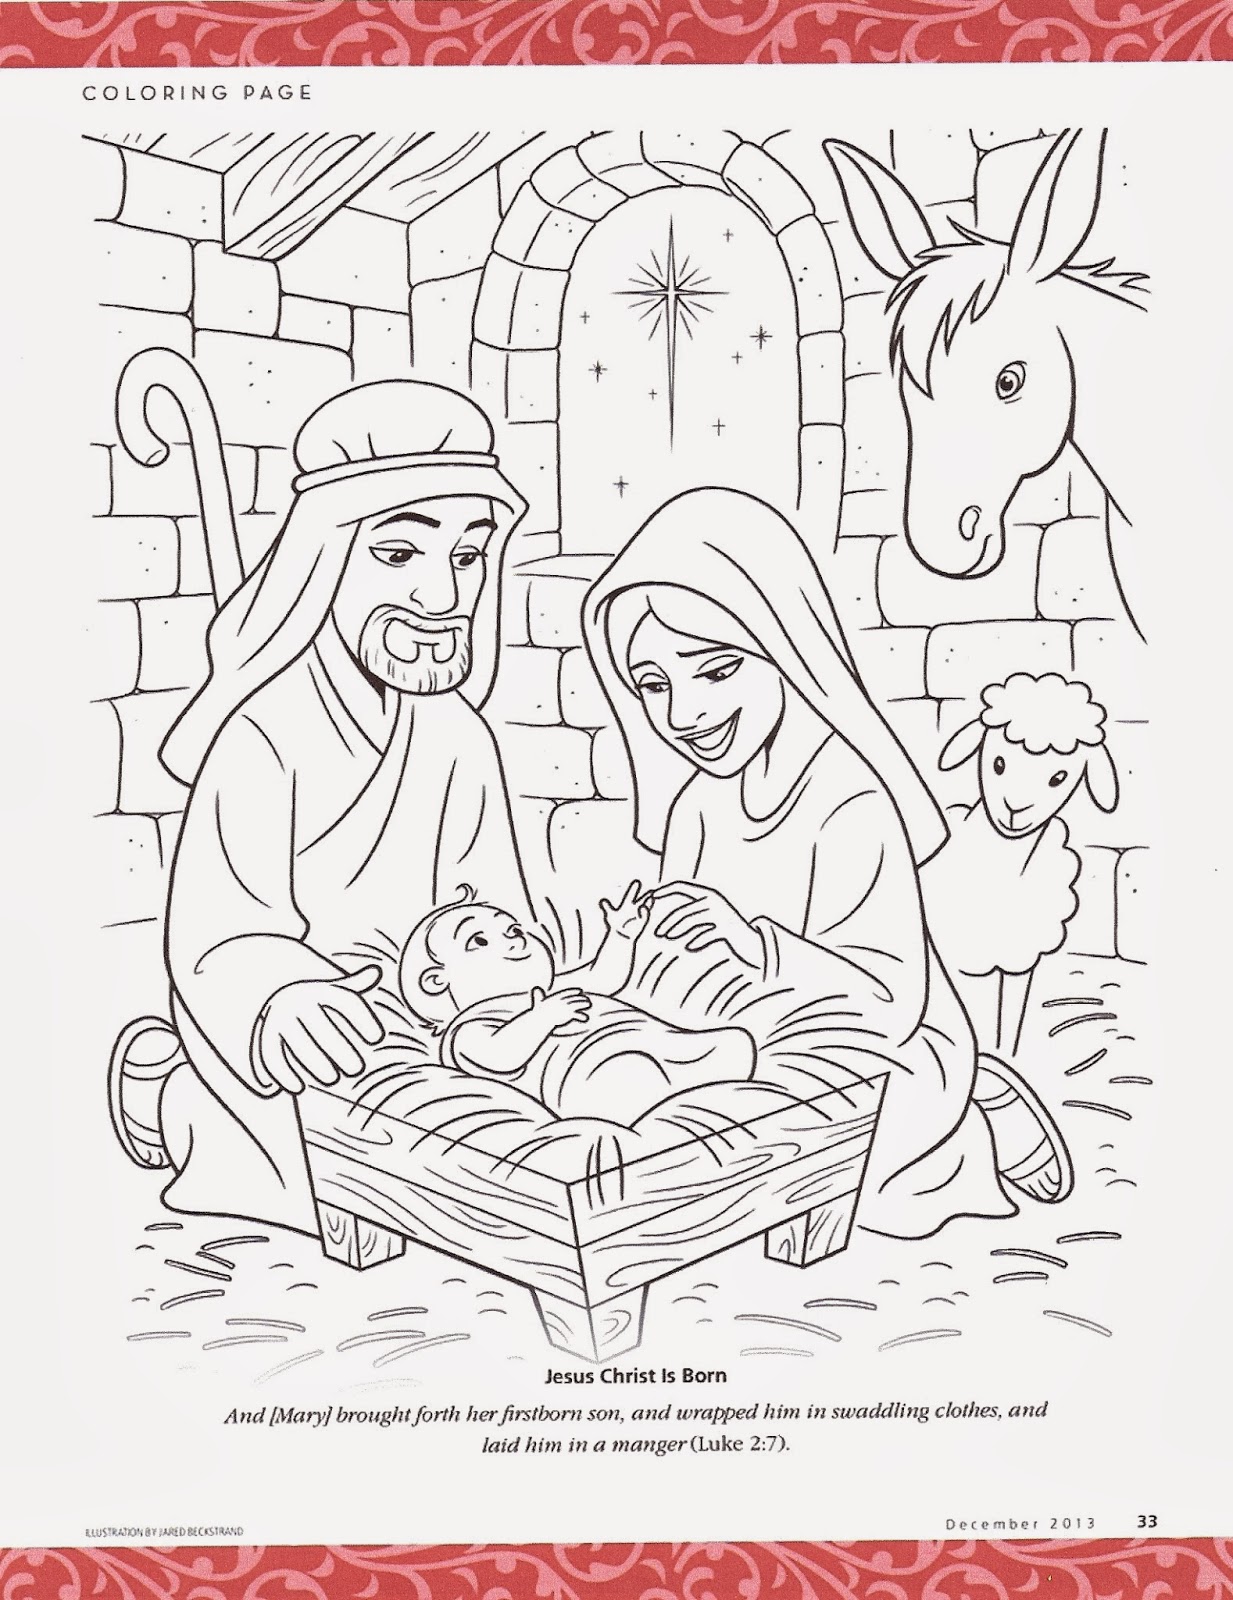 Jesus Christ is Born coloring page from the December 2013 Friend here